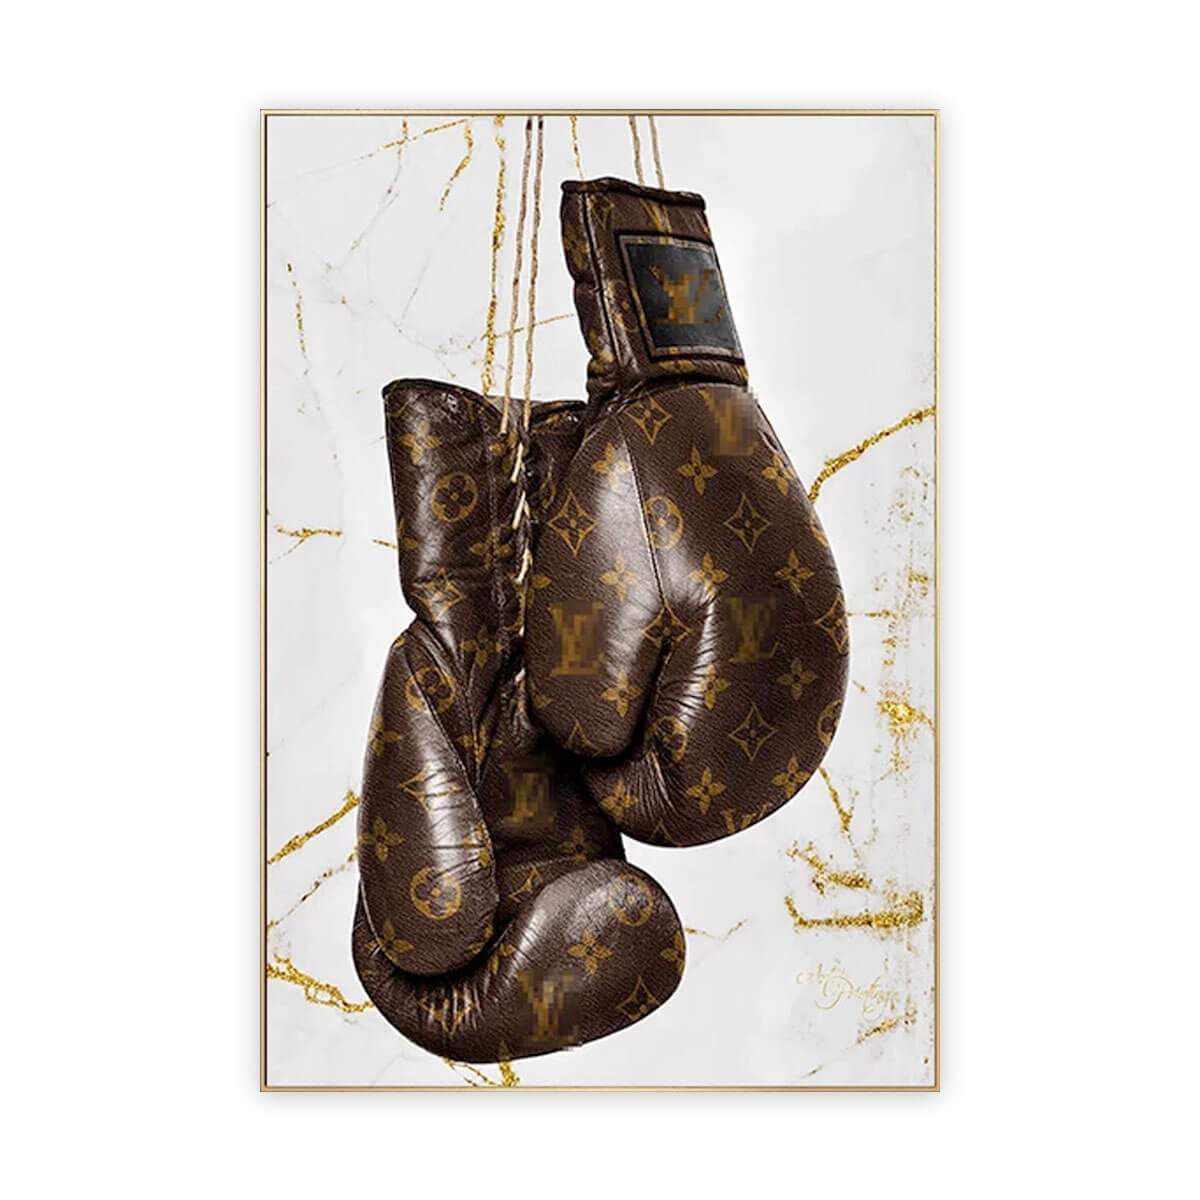 Luxury Gold Foil Boxing Gloves Canvas Painting Print Wall Art